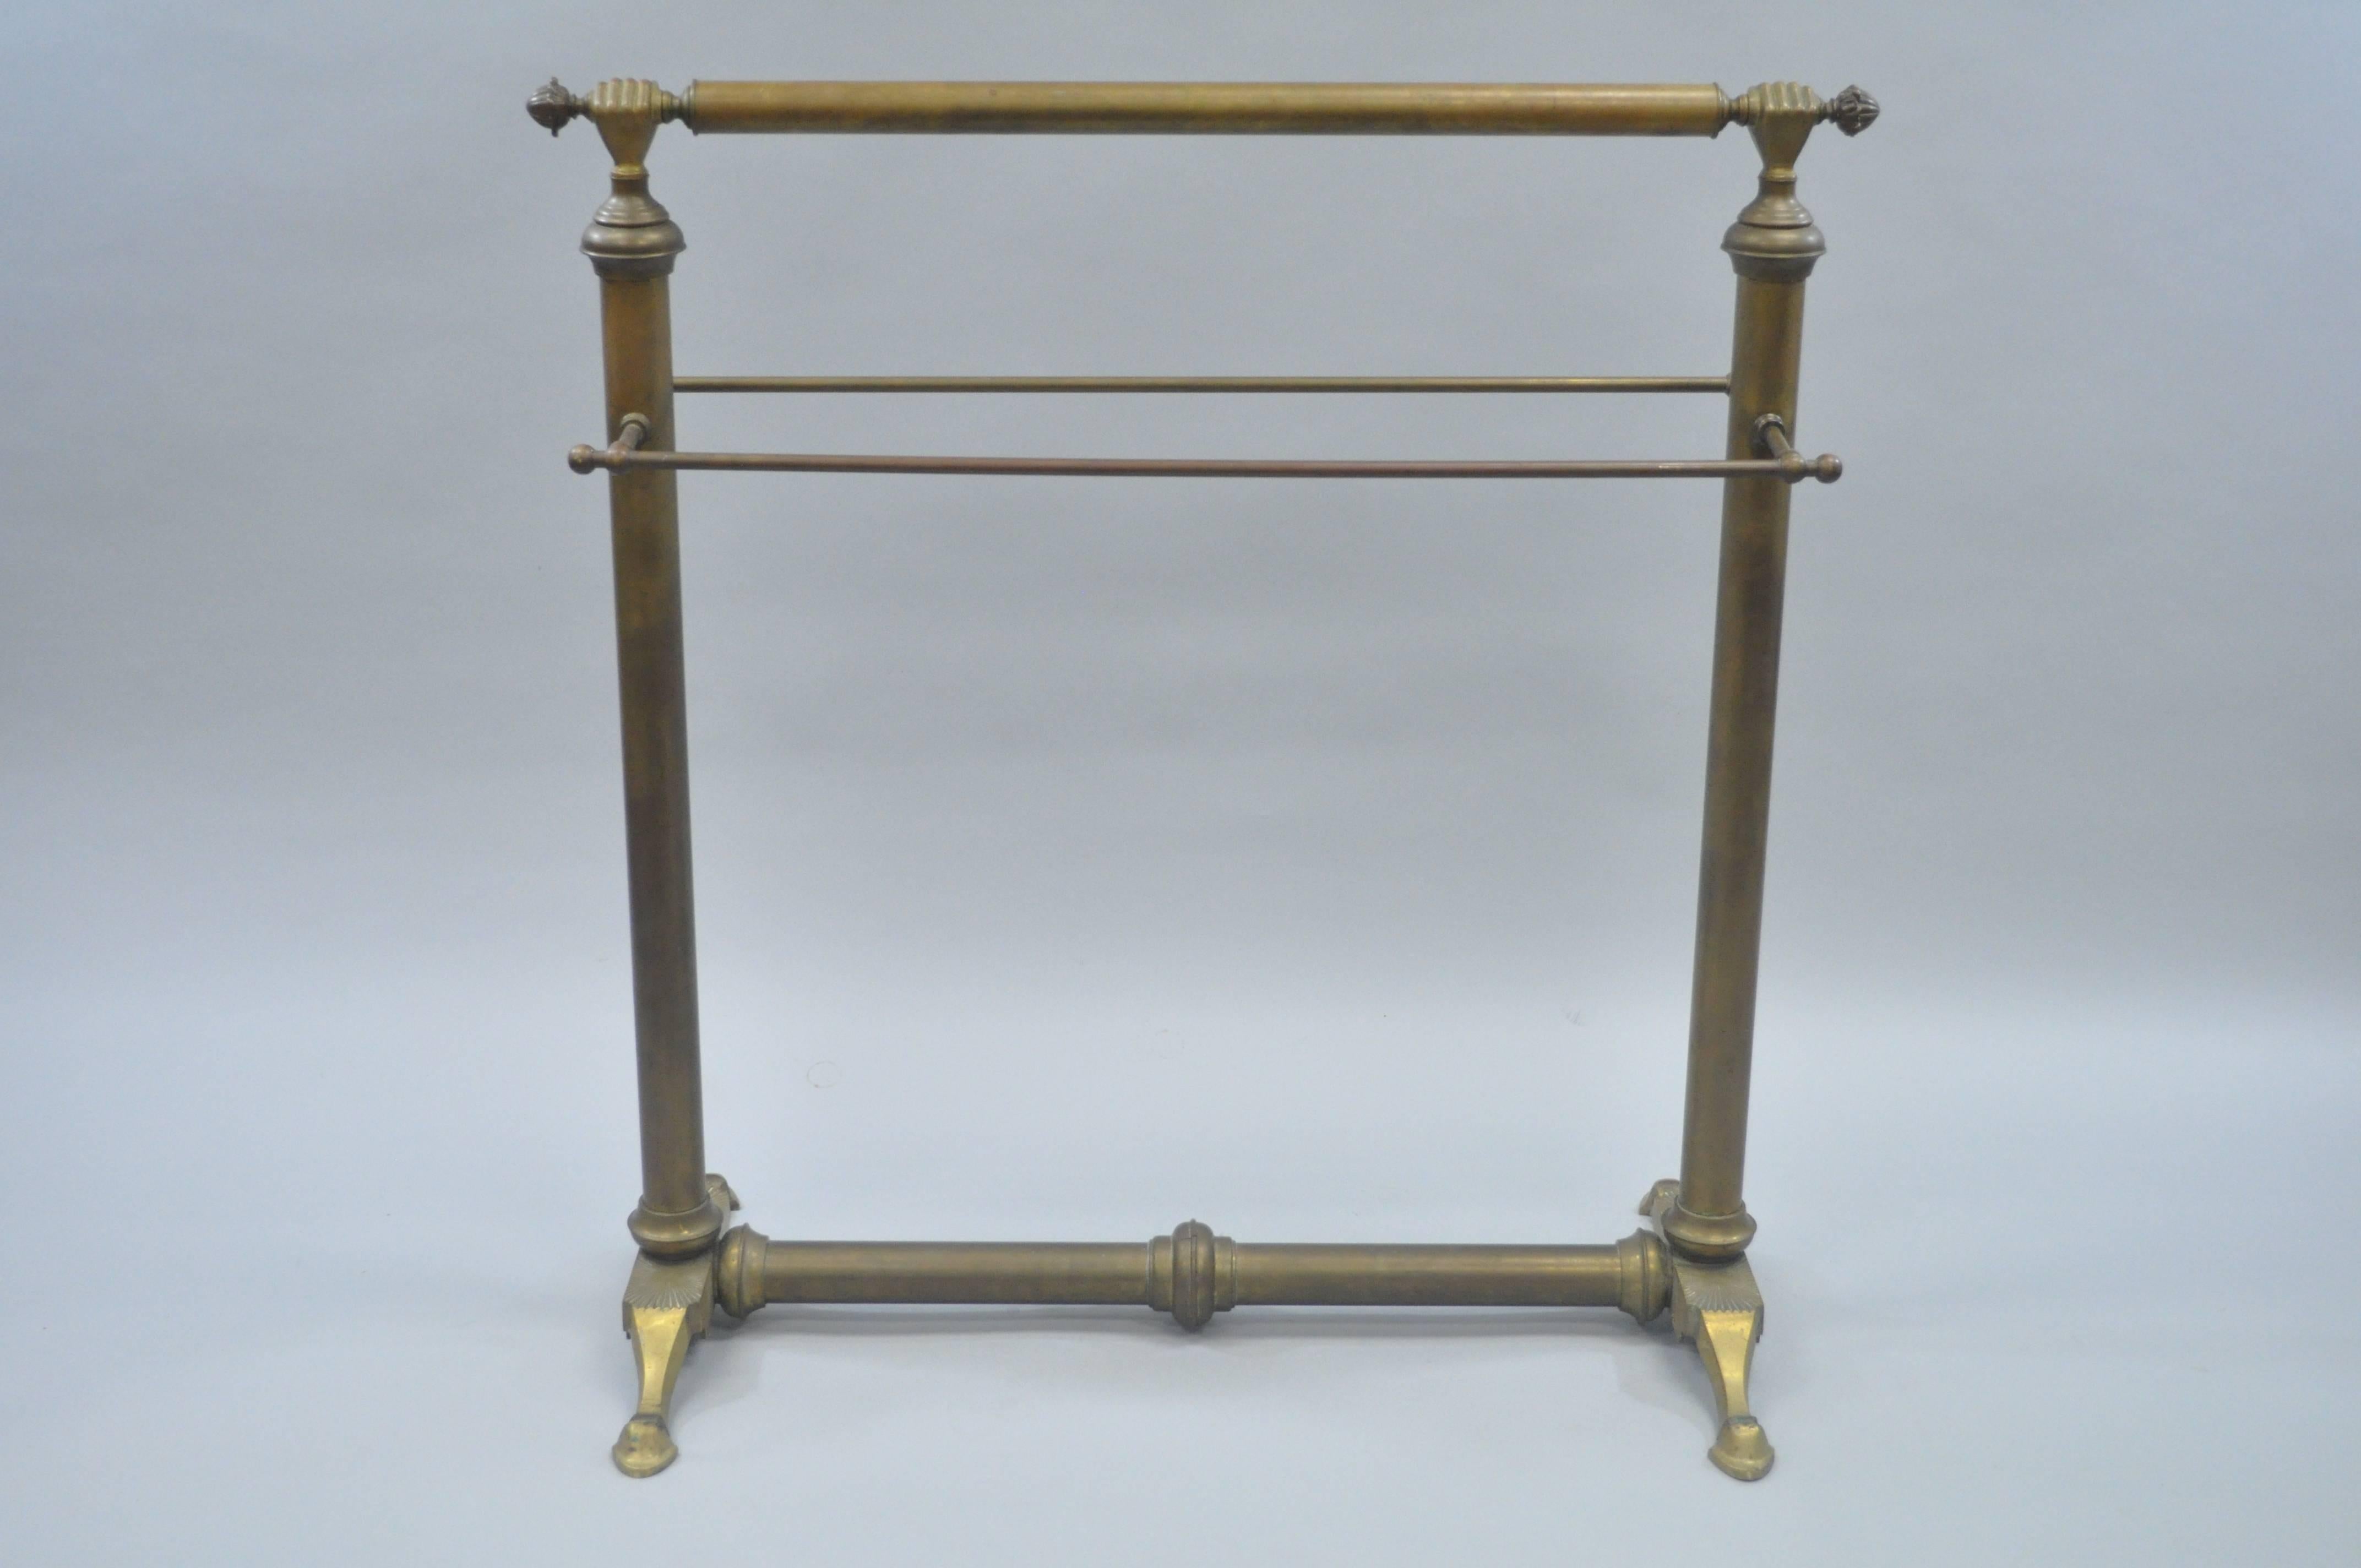 European Clasped Hands Victorian Andre Arbus Style Brass Quilt Towel Rack Stand Holder